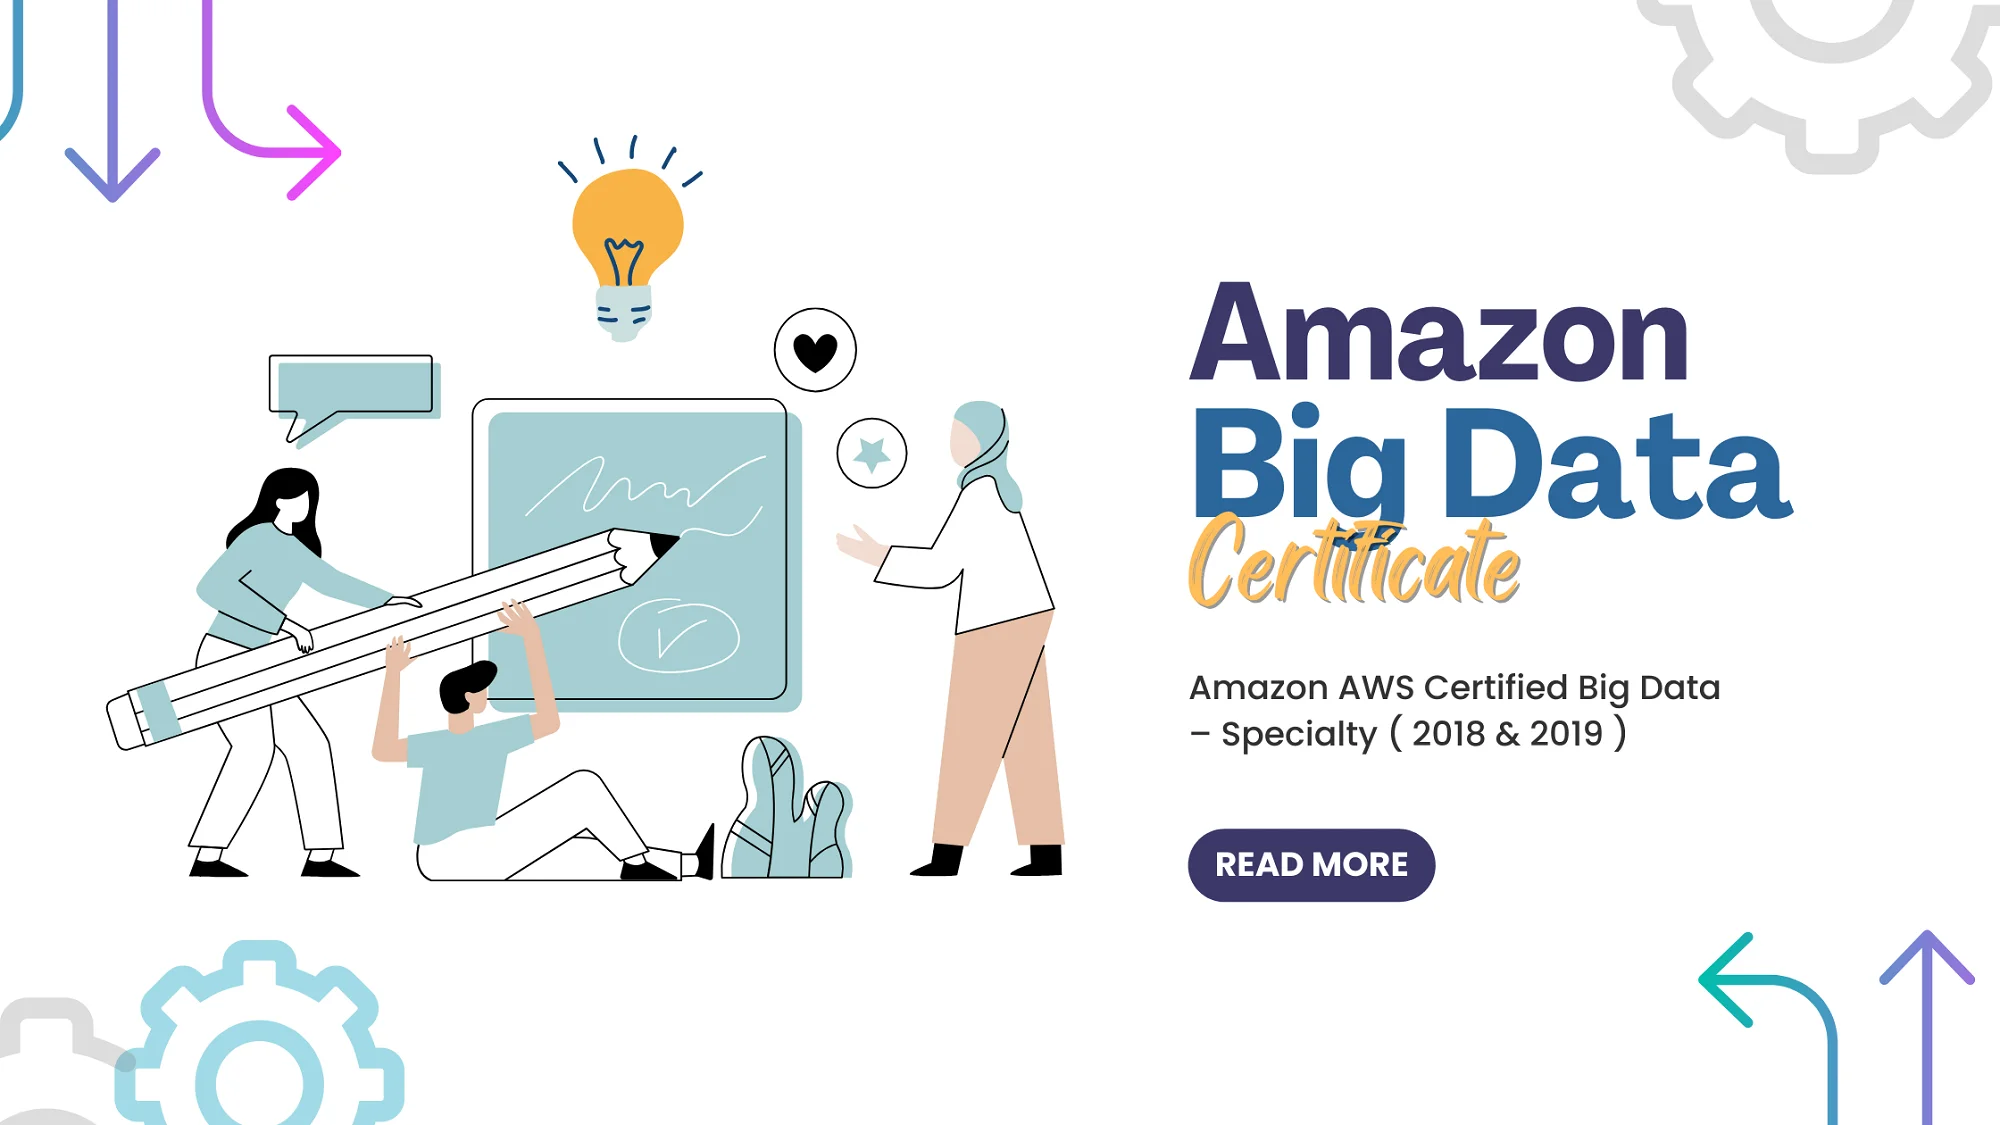 AWS Big Data Certificate promotion